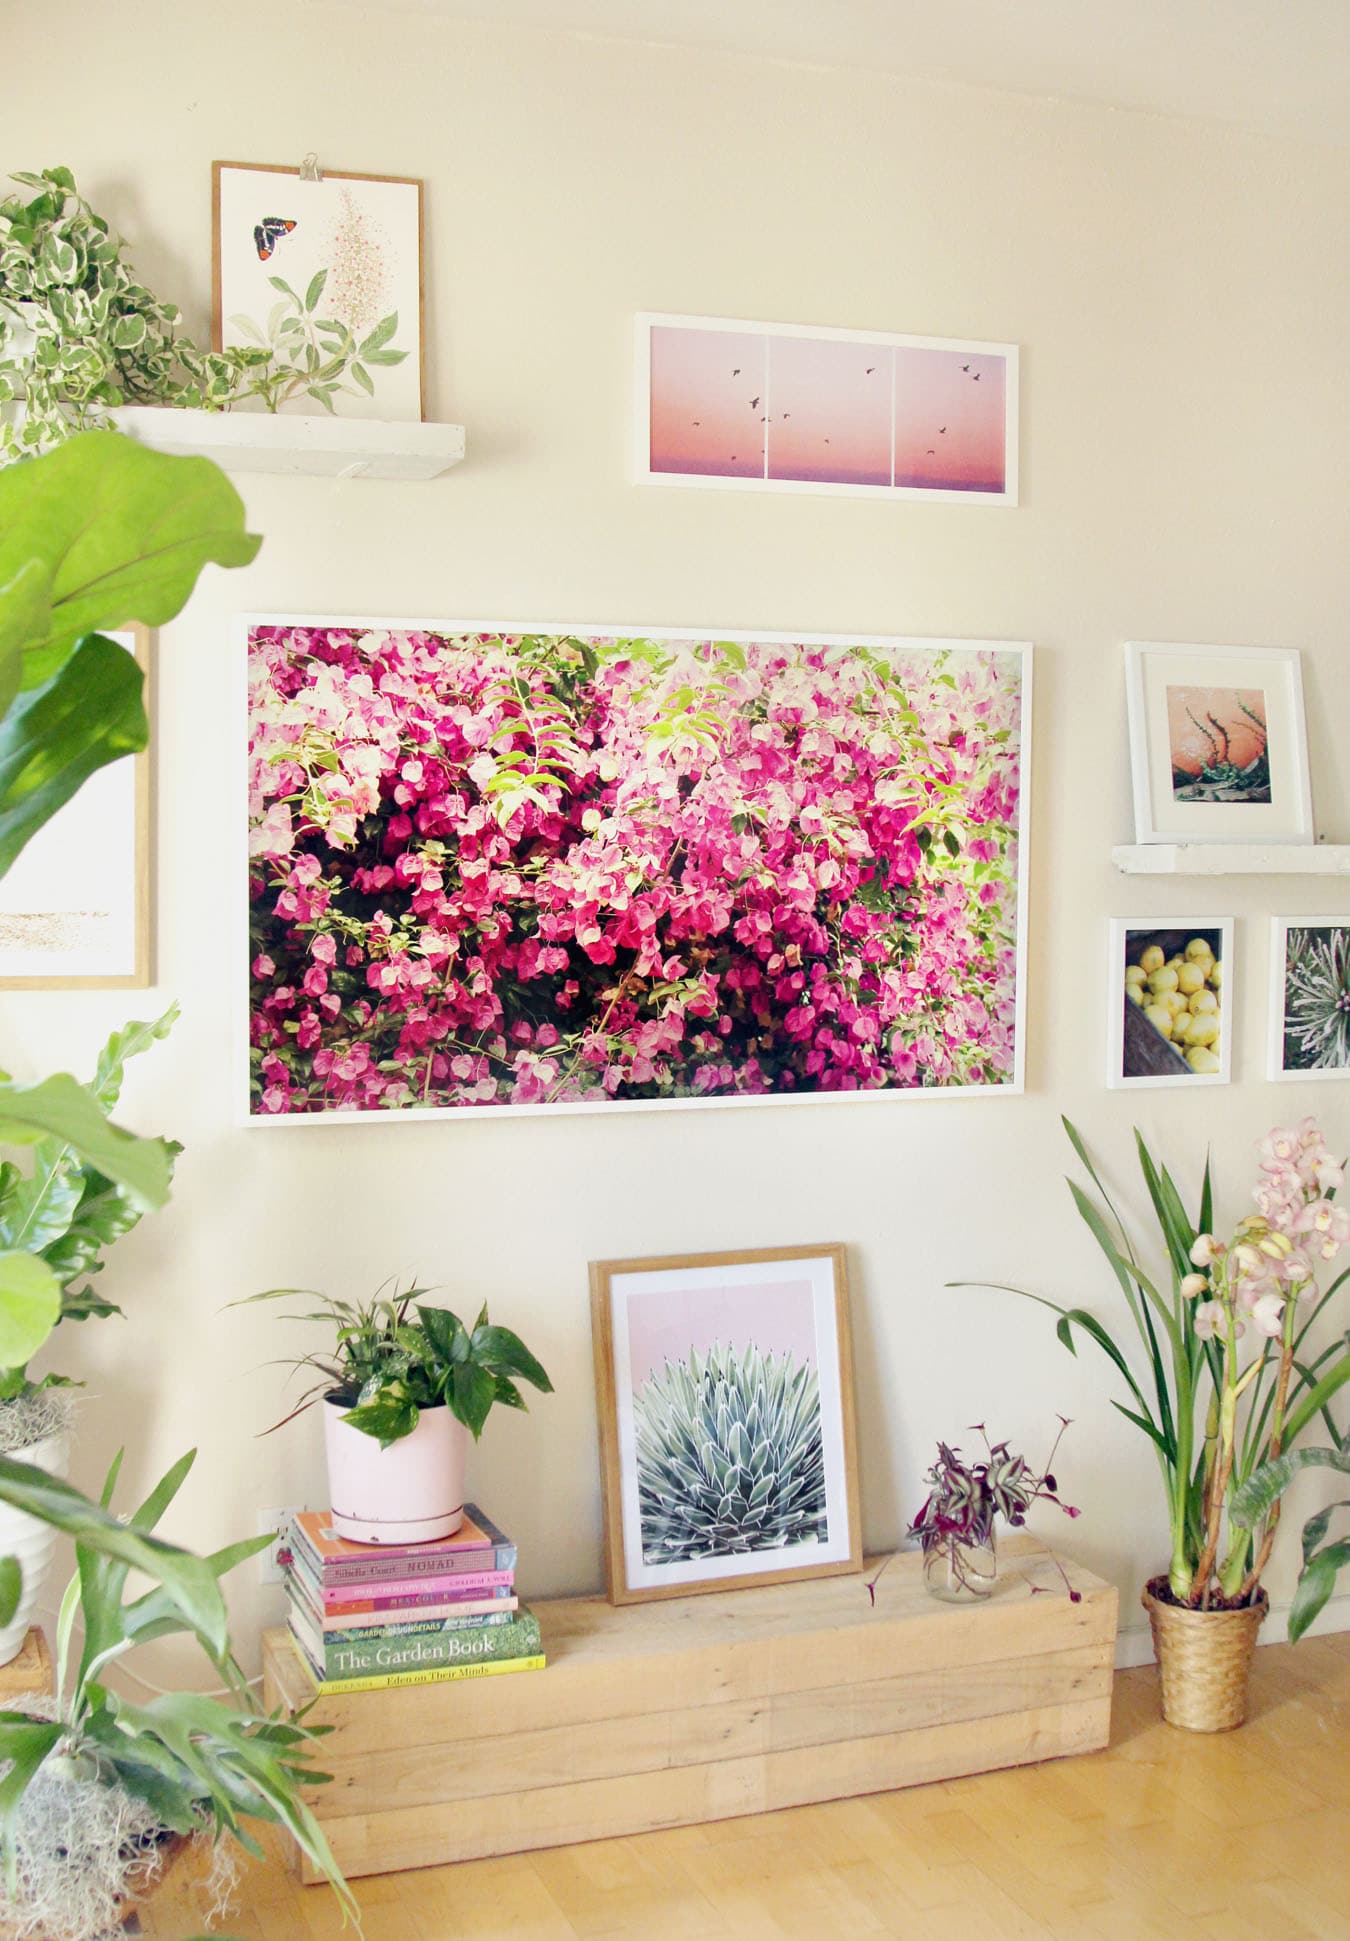 Check out our gorgeous indoor garden with 18 best indoor plants! Plus 5 essential tips on how to grow healthy house plants! Make your home more beautiful with these showy foliage and flowering plants that thrive in low light conditions, and are so easy to grow! - A Piece of Rainbow